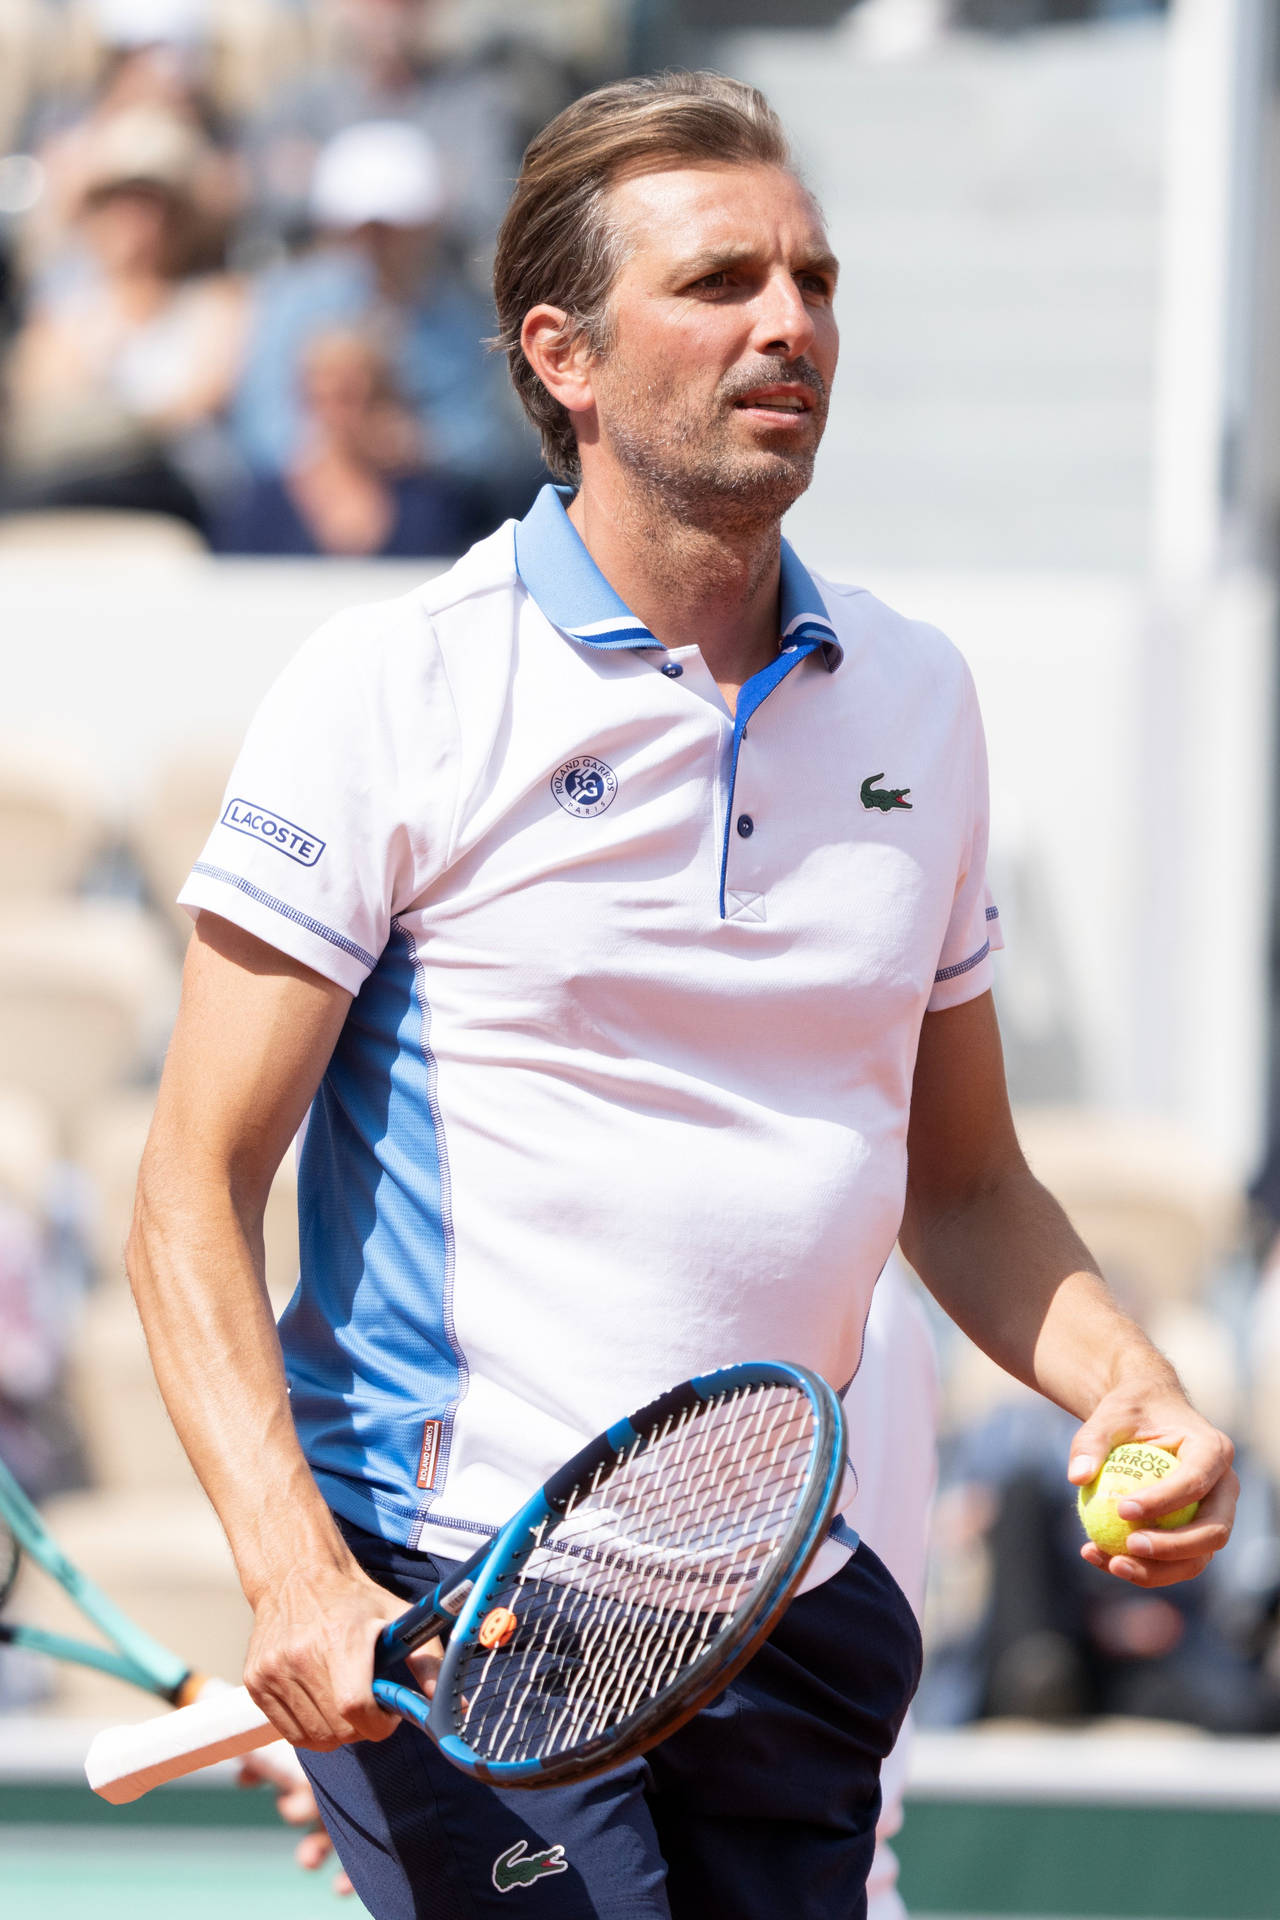 Julien Benneteau in Action- View of French Tennis Player, Julien Benneteau, Serving during a Match, Wearing a White Polo Shirt. Wallpaper